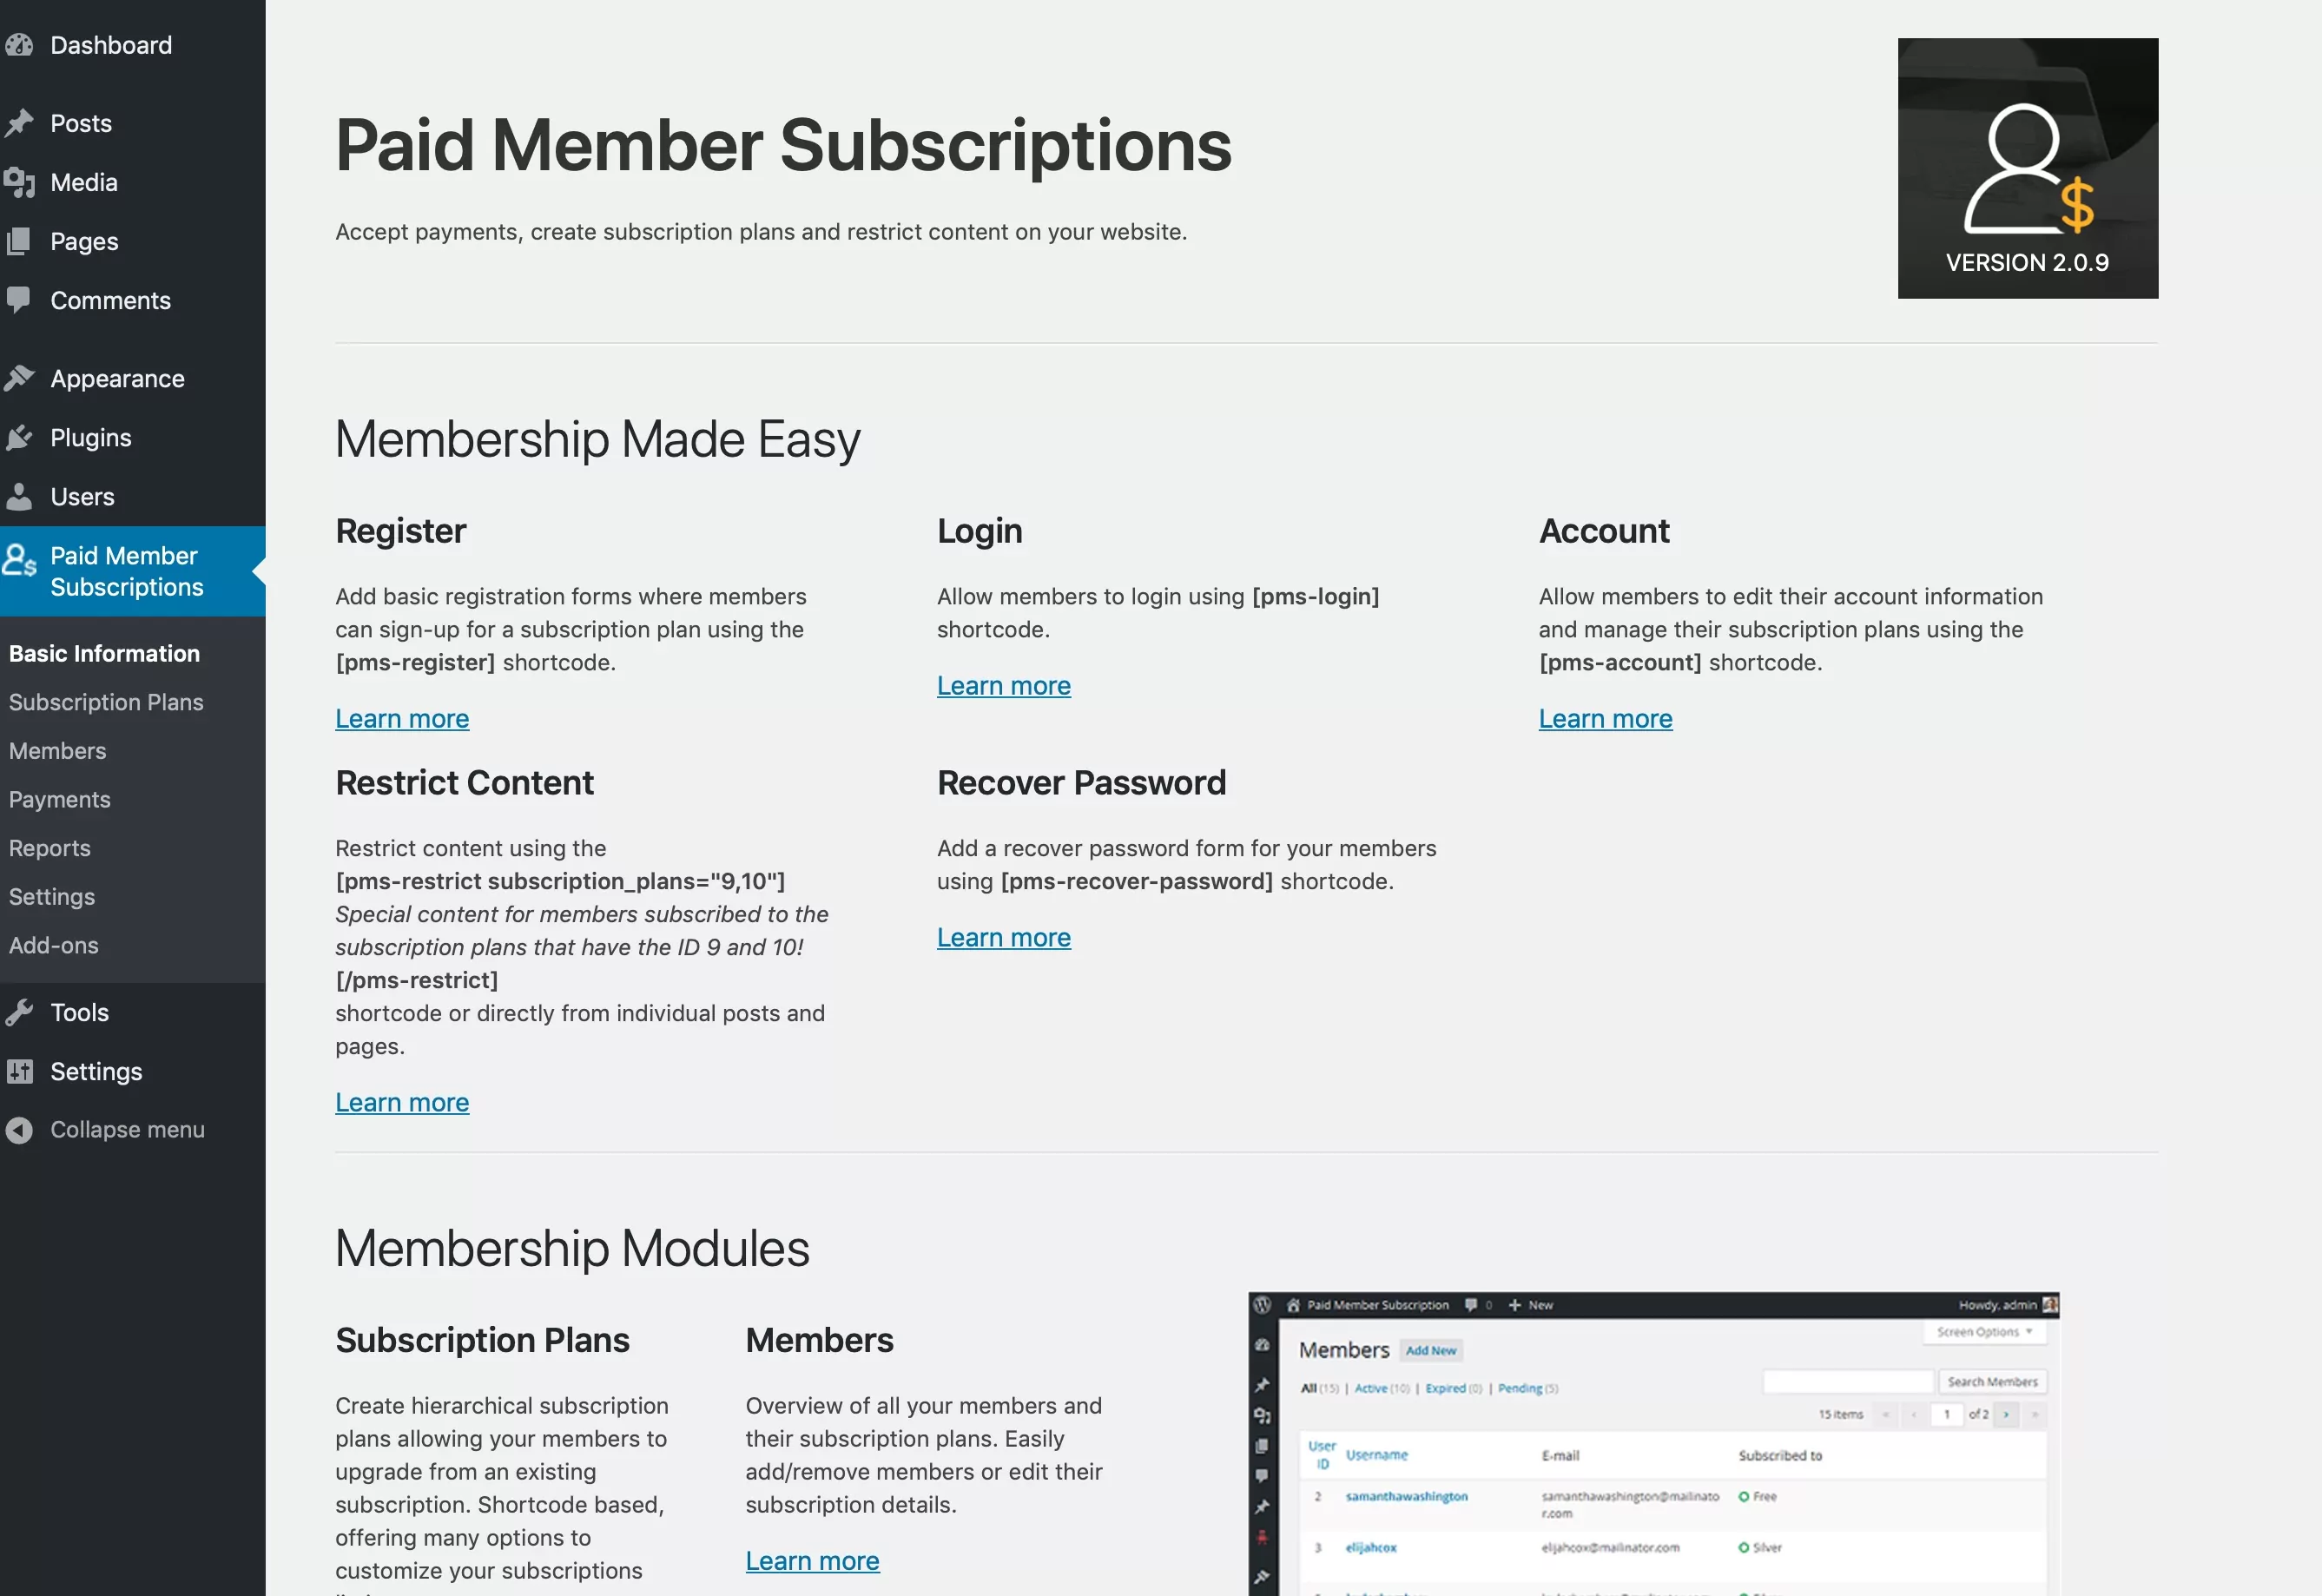 Paid Member Subscriptions basic information